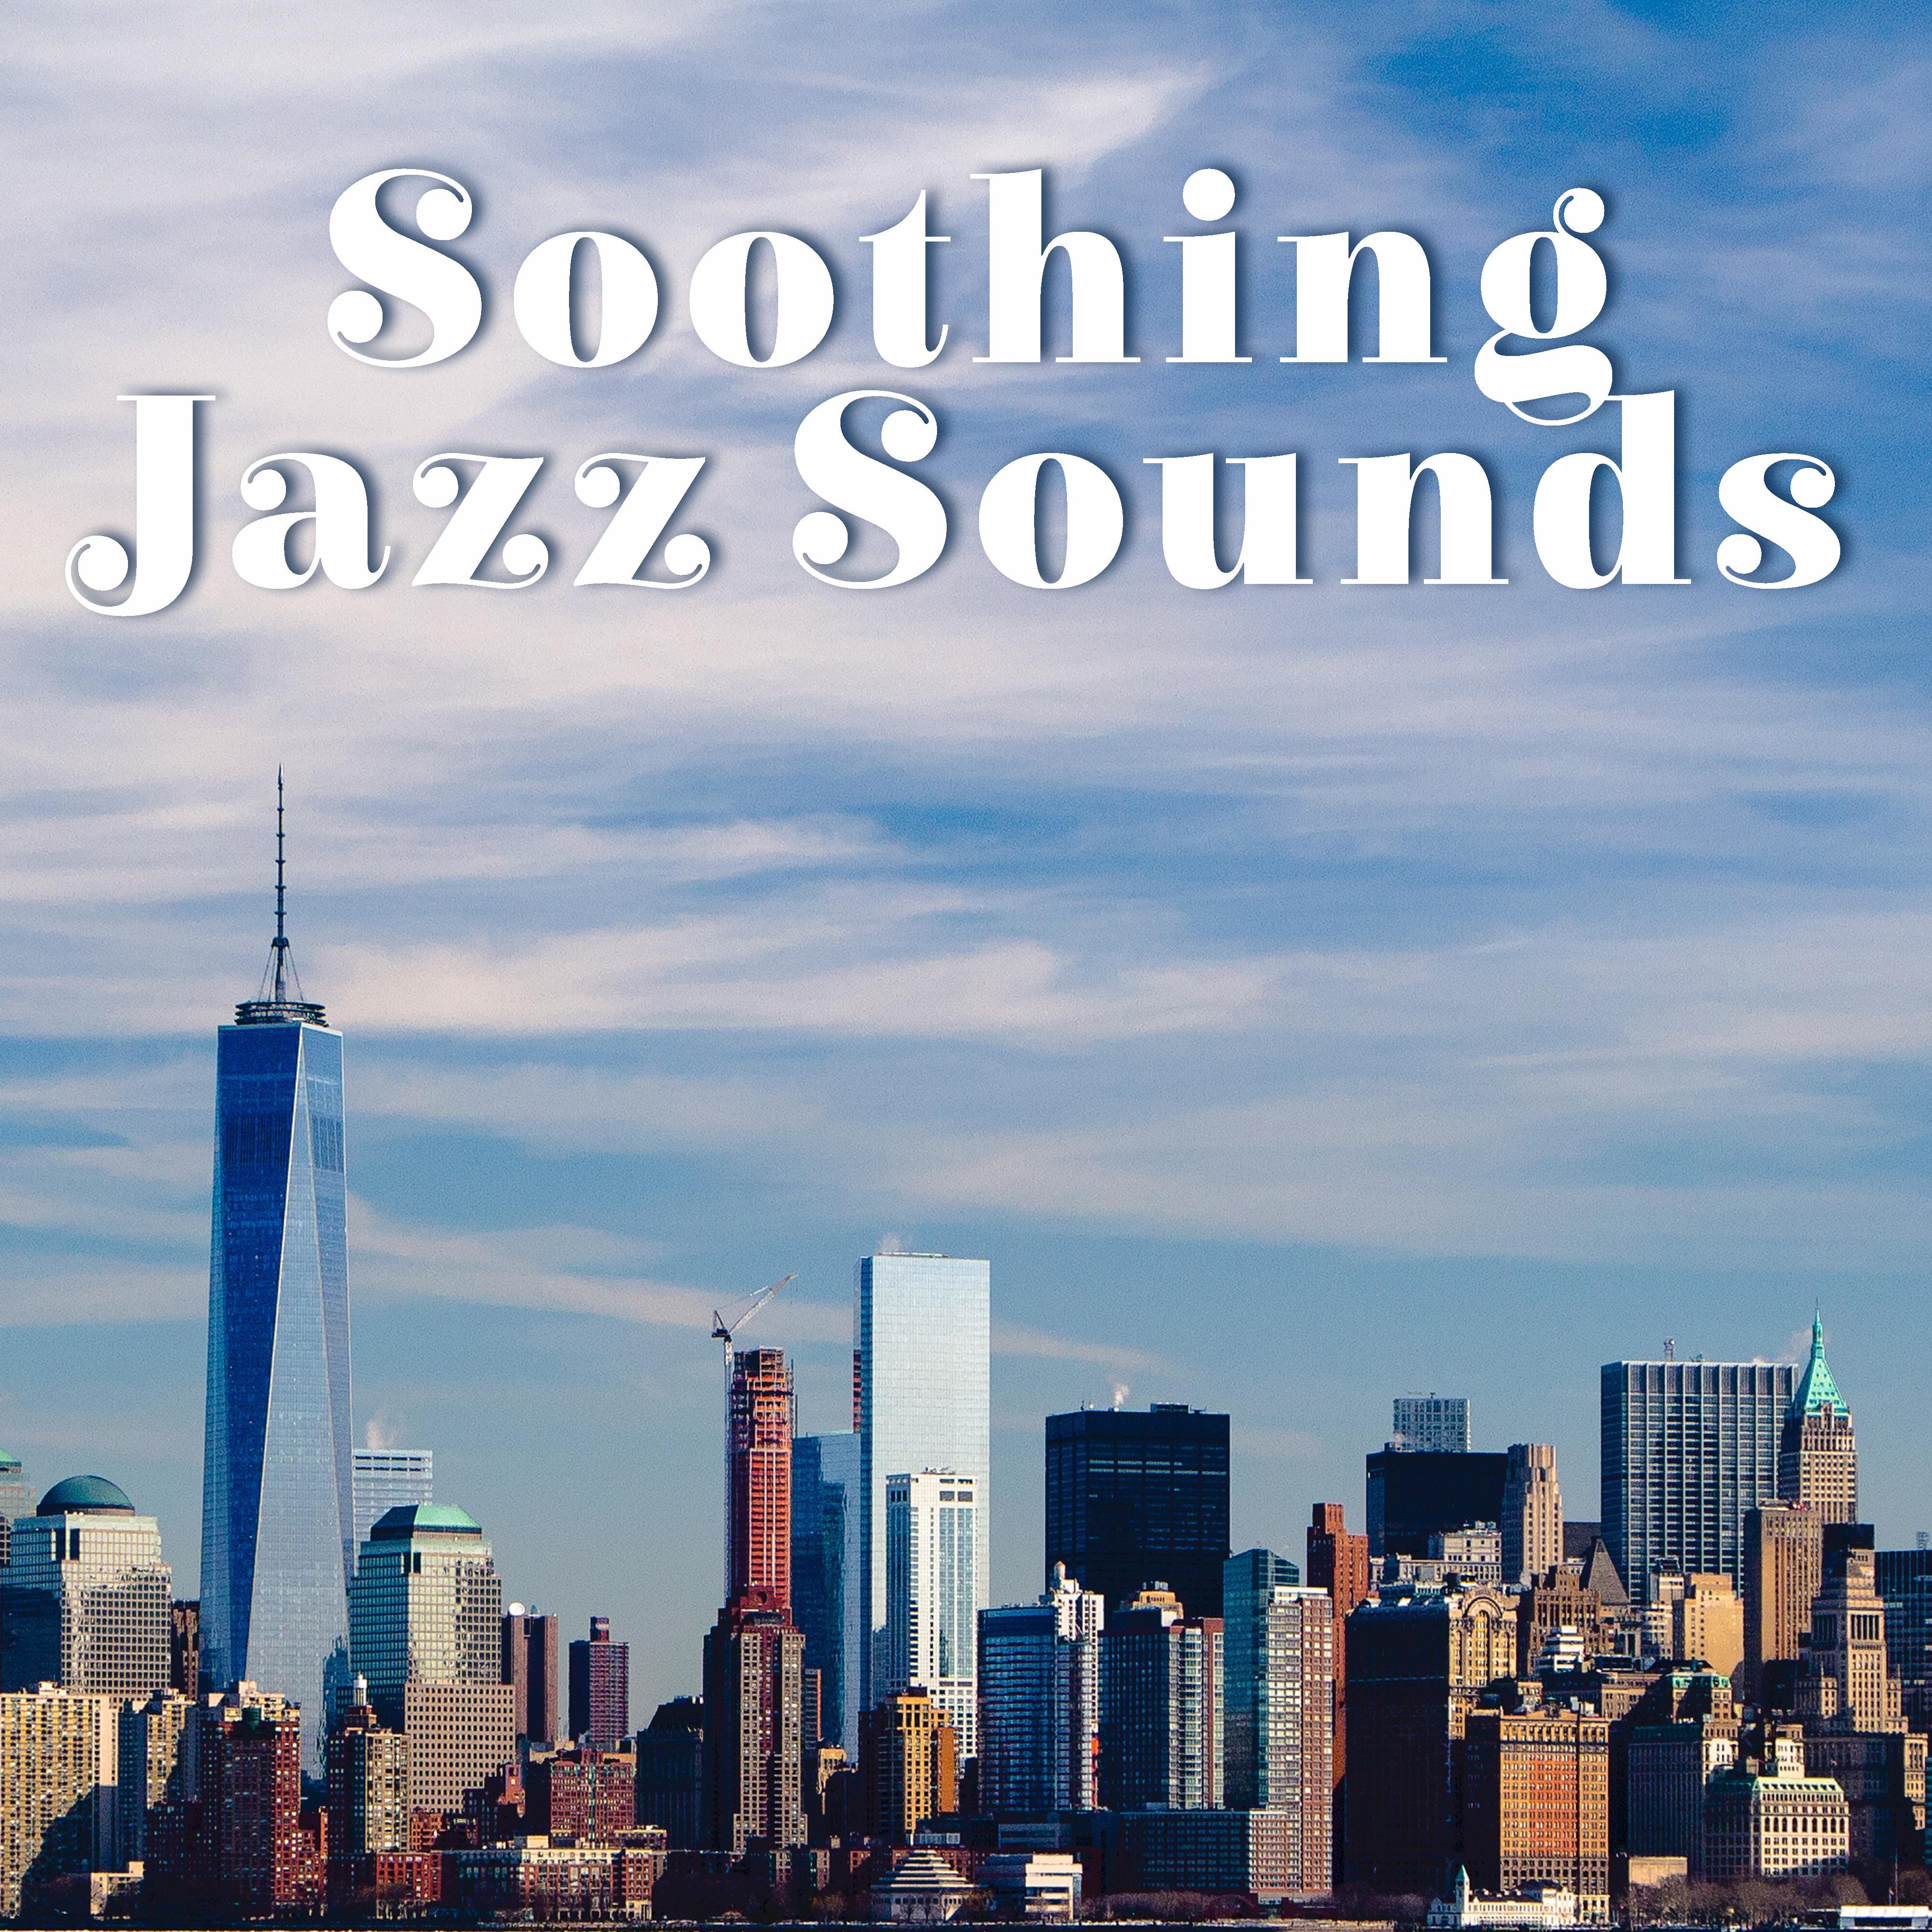 Soothing Jazz Sounds – Calm Sounds to Relax, Jazz to Rest, Smooth Vibes, Chilled & Mellow Music